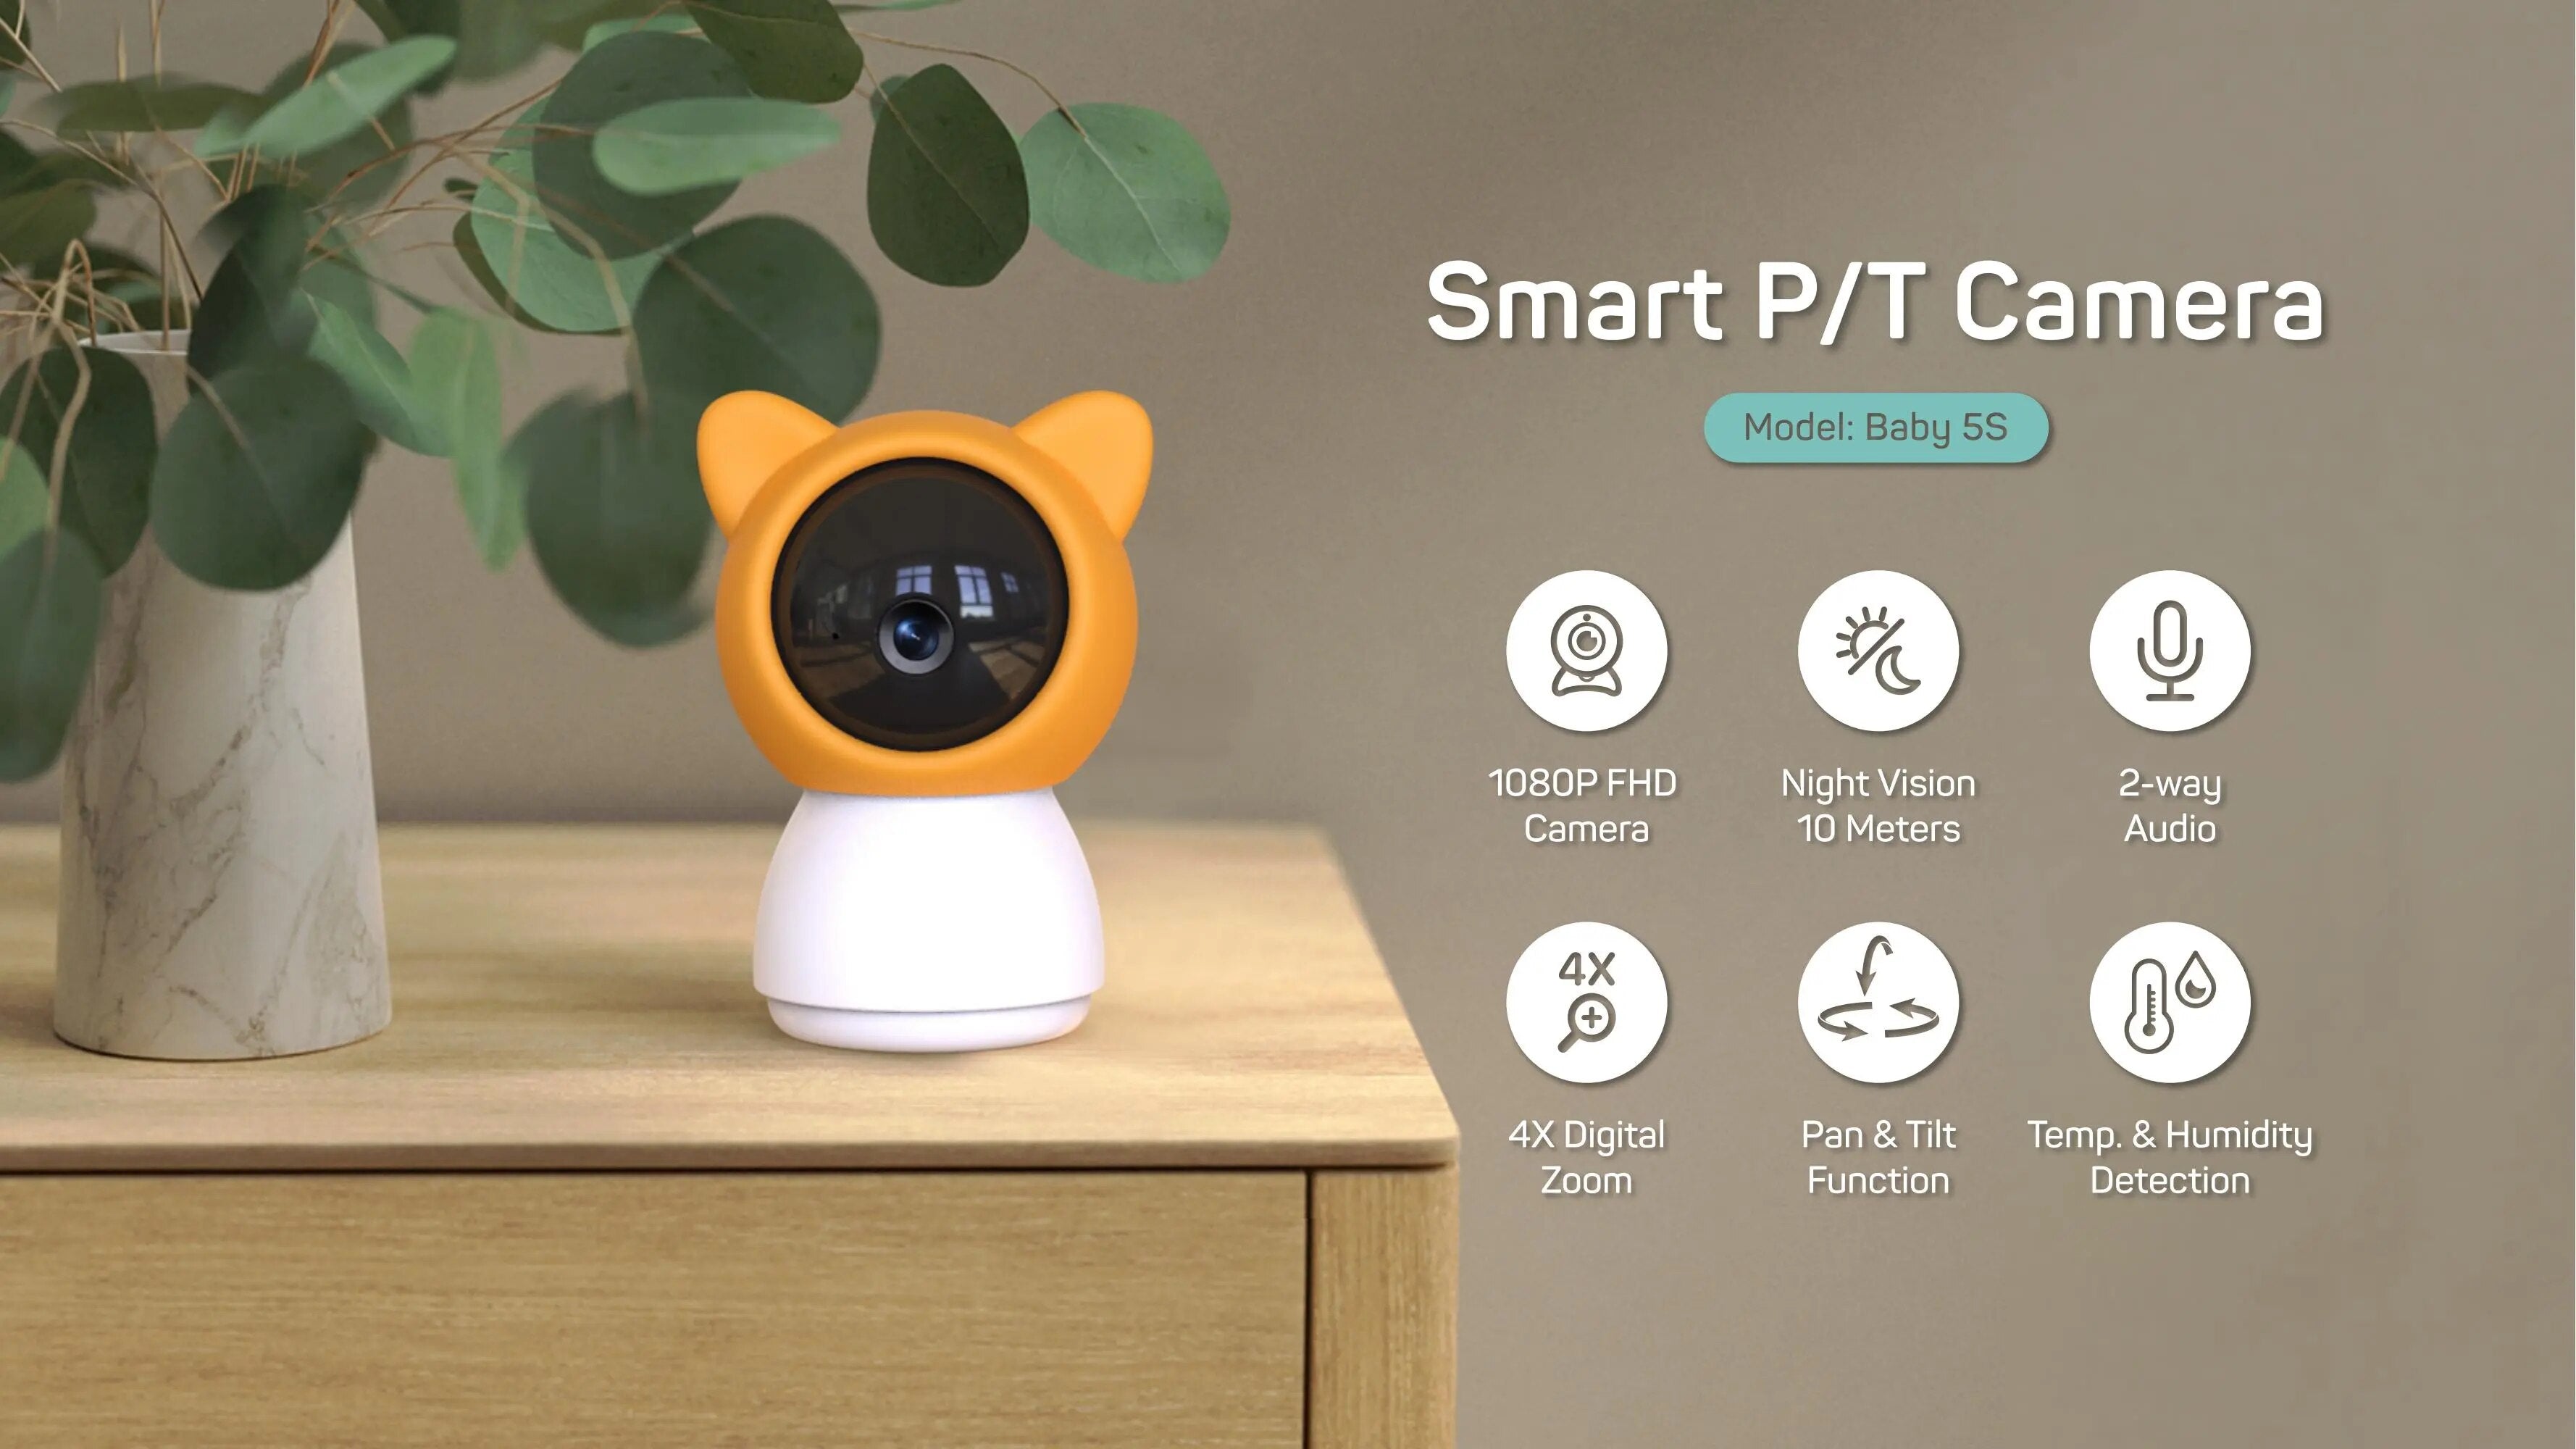 NEW 5" Video Baby Monitor 2.4GH WiFi 1080P Camera NightVision Motion and Sound Notifications Humidity Support Phone App Control